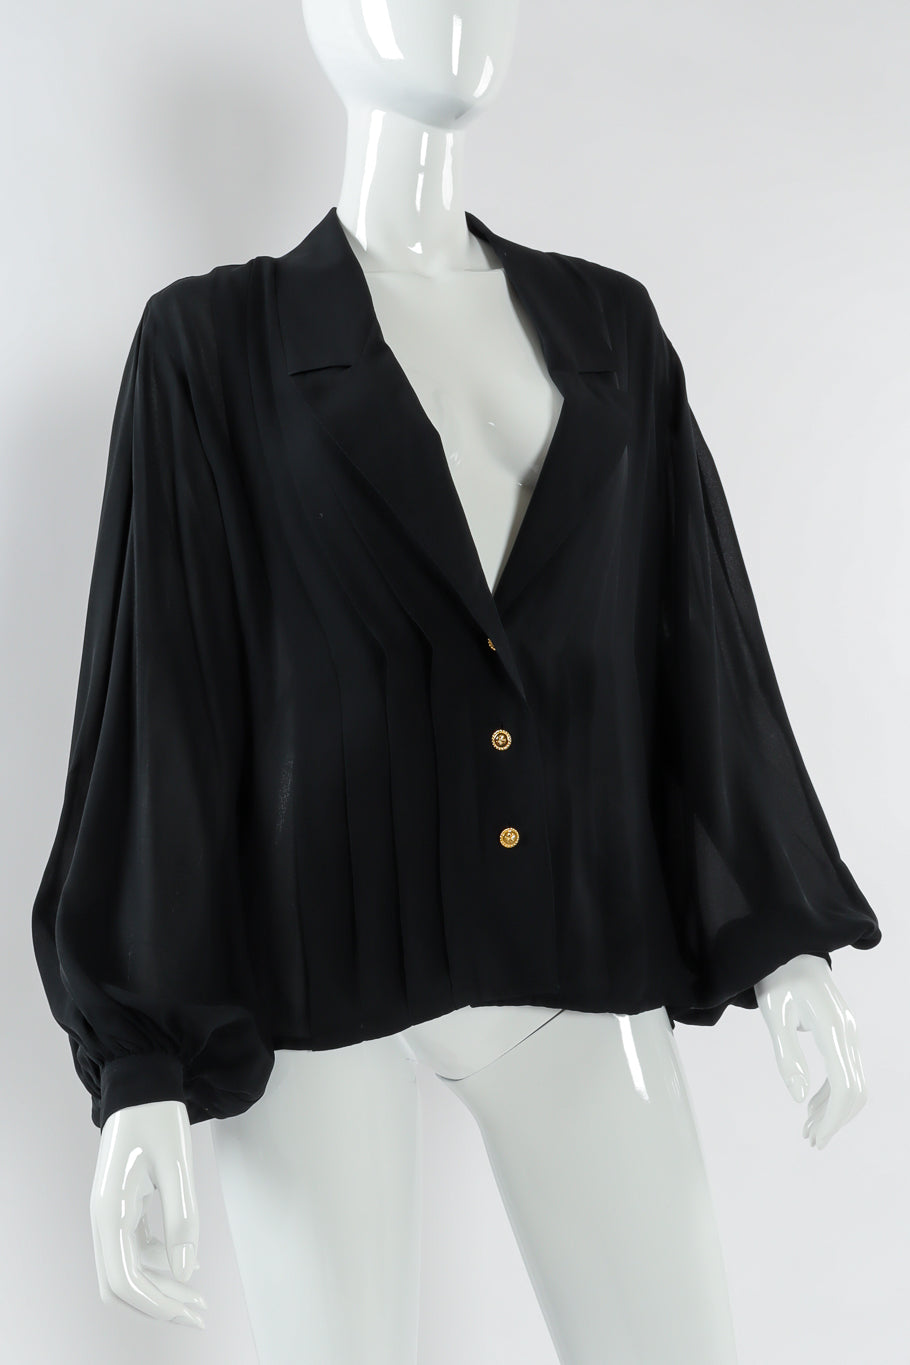 Vintage Chanel Pleated Sheer Silk Blouse mannequin top front angle @ Recess LA